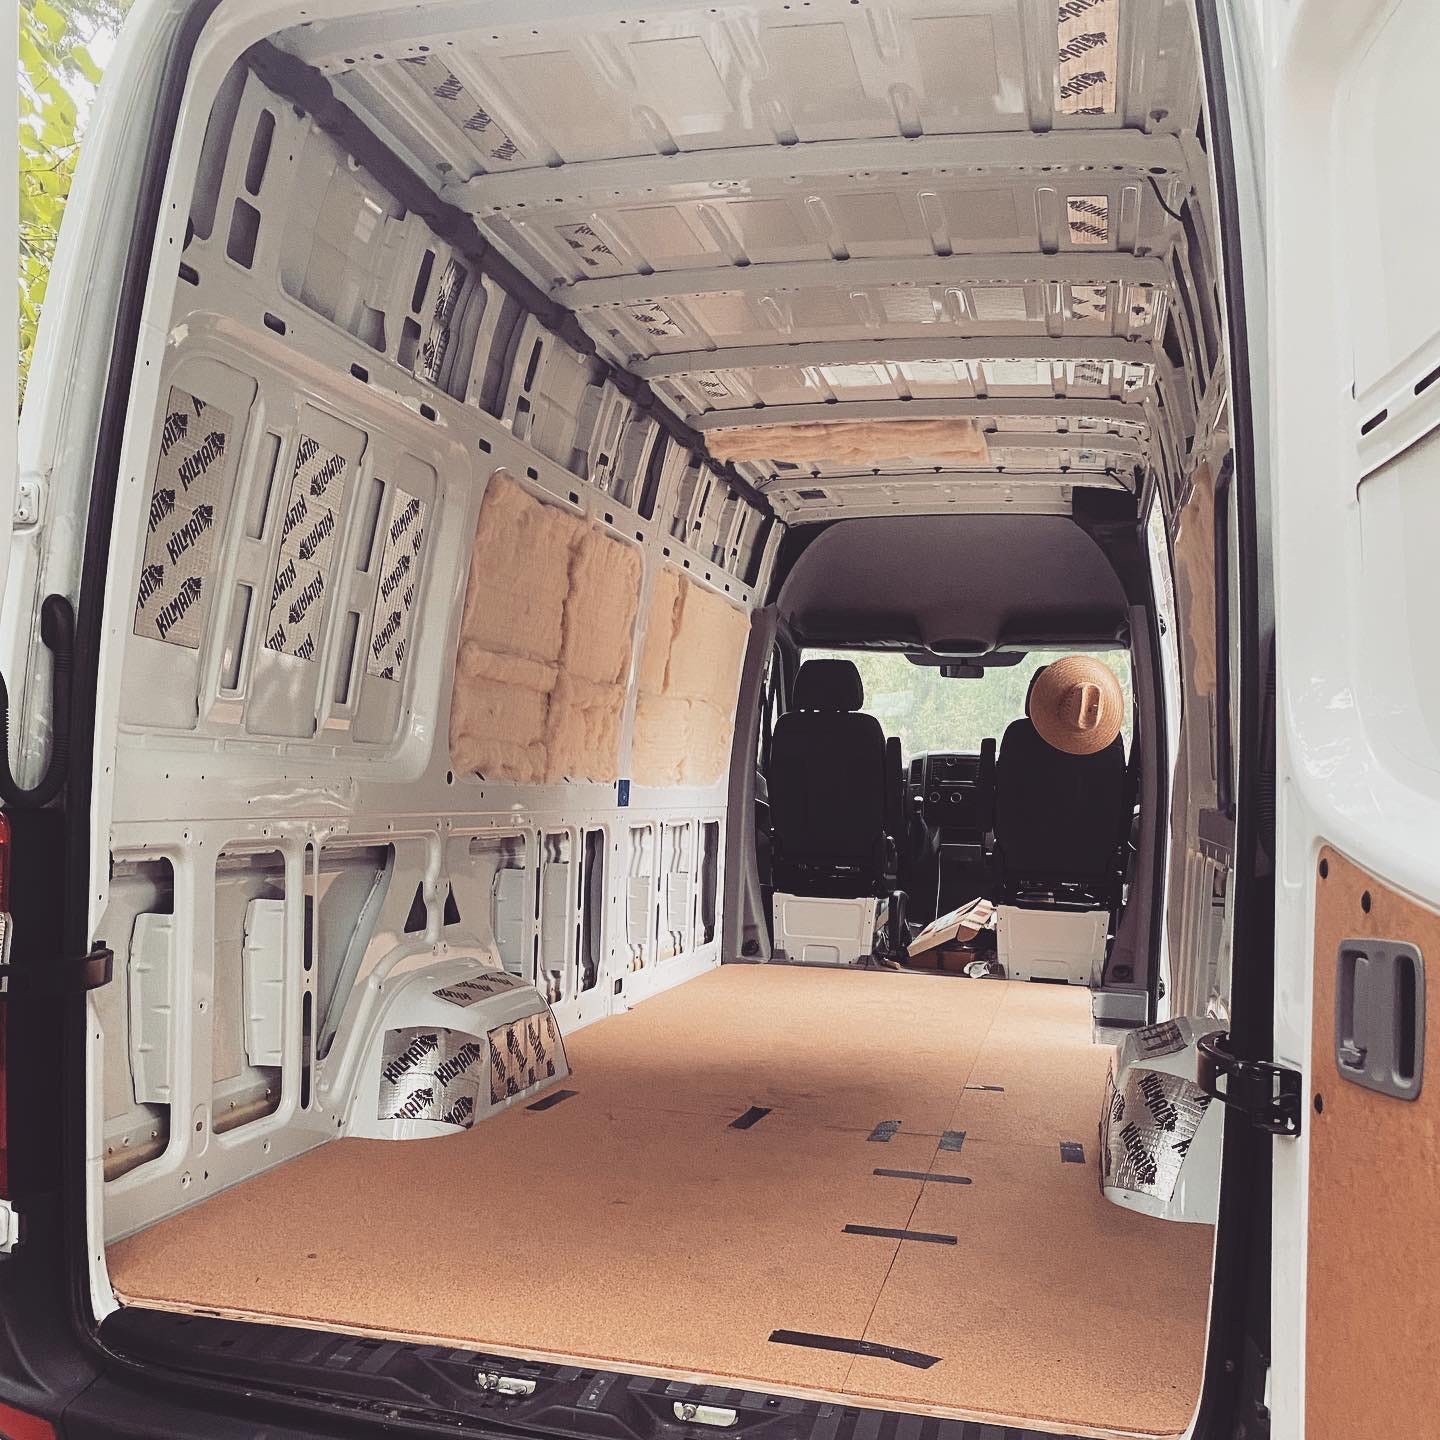 The empty inside of a white van.